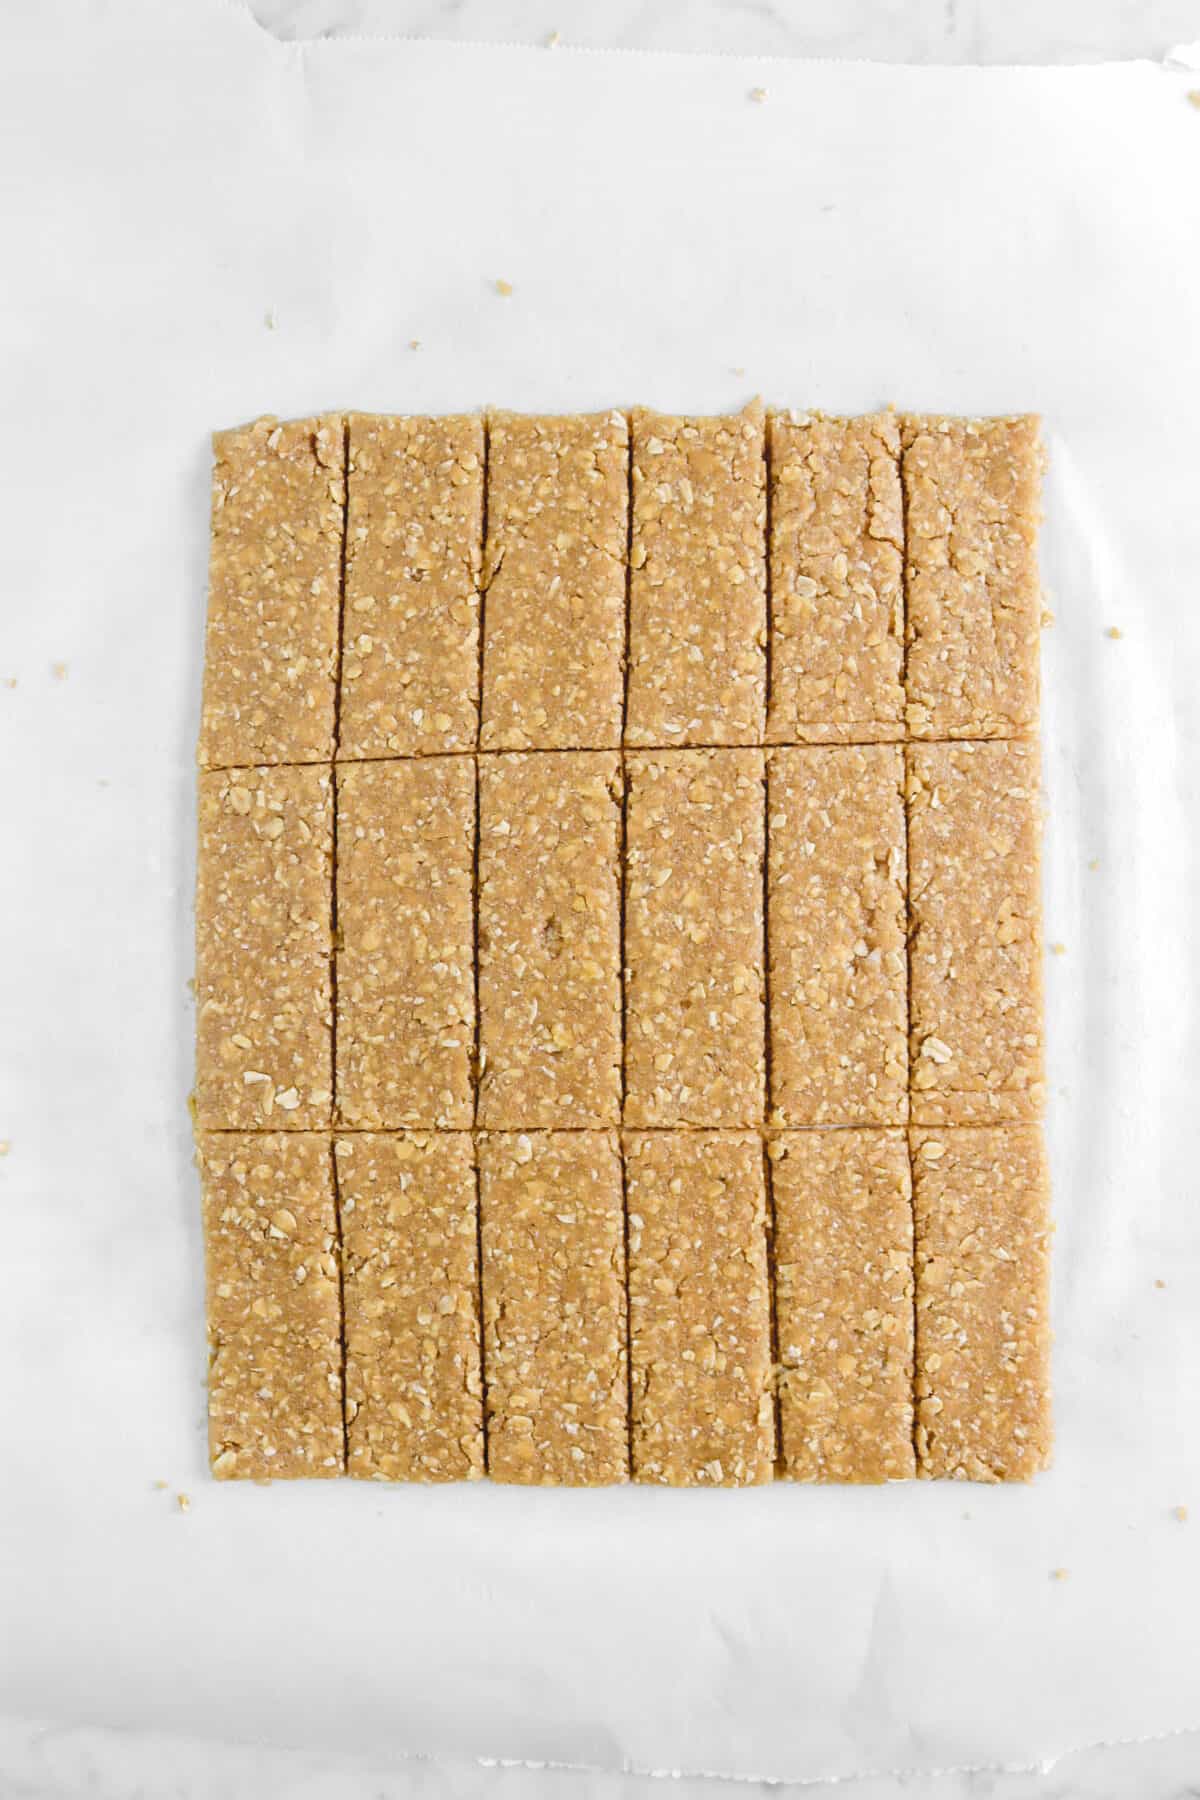 dough cut into eighteen rectangles on parchment paper